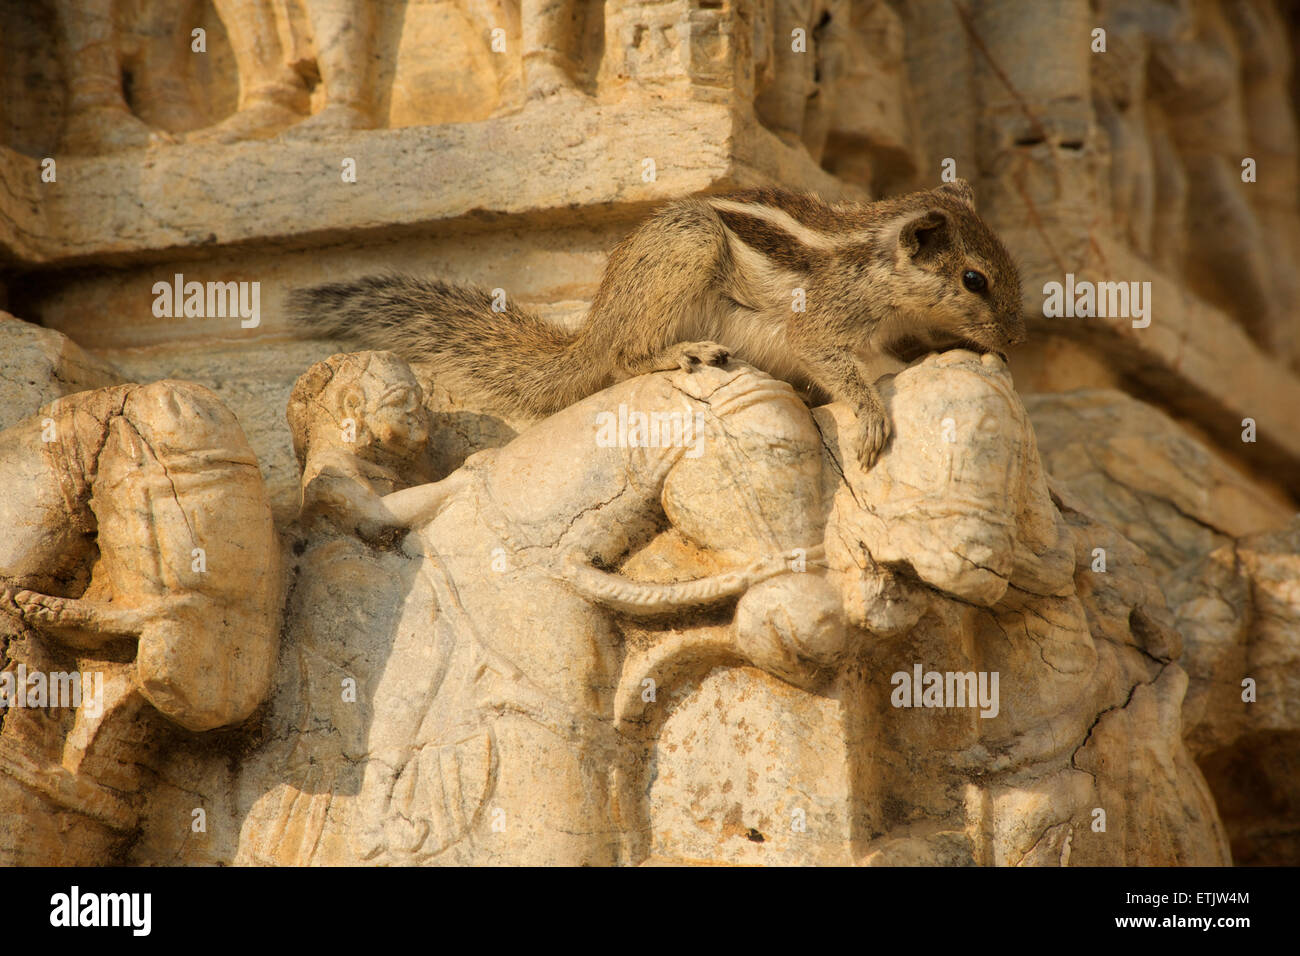 Squirrel crawling across ornate stone carving of horses, Jagdish Temple, Udaipur, Rajasthan, India Stock Photo